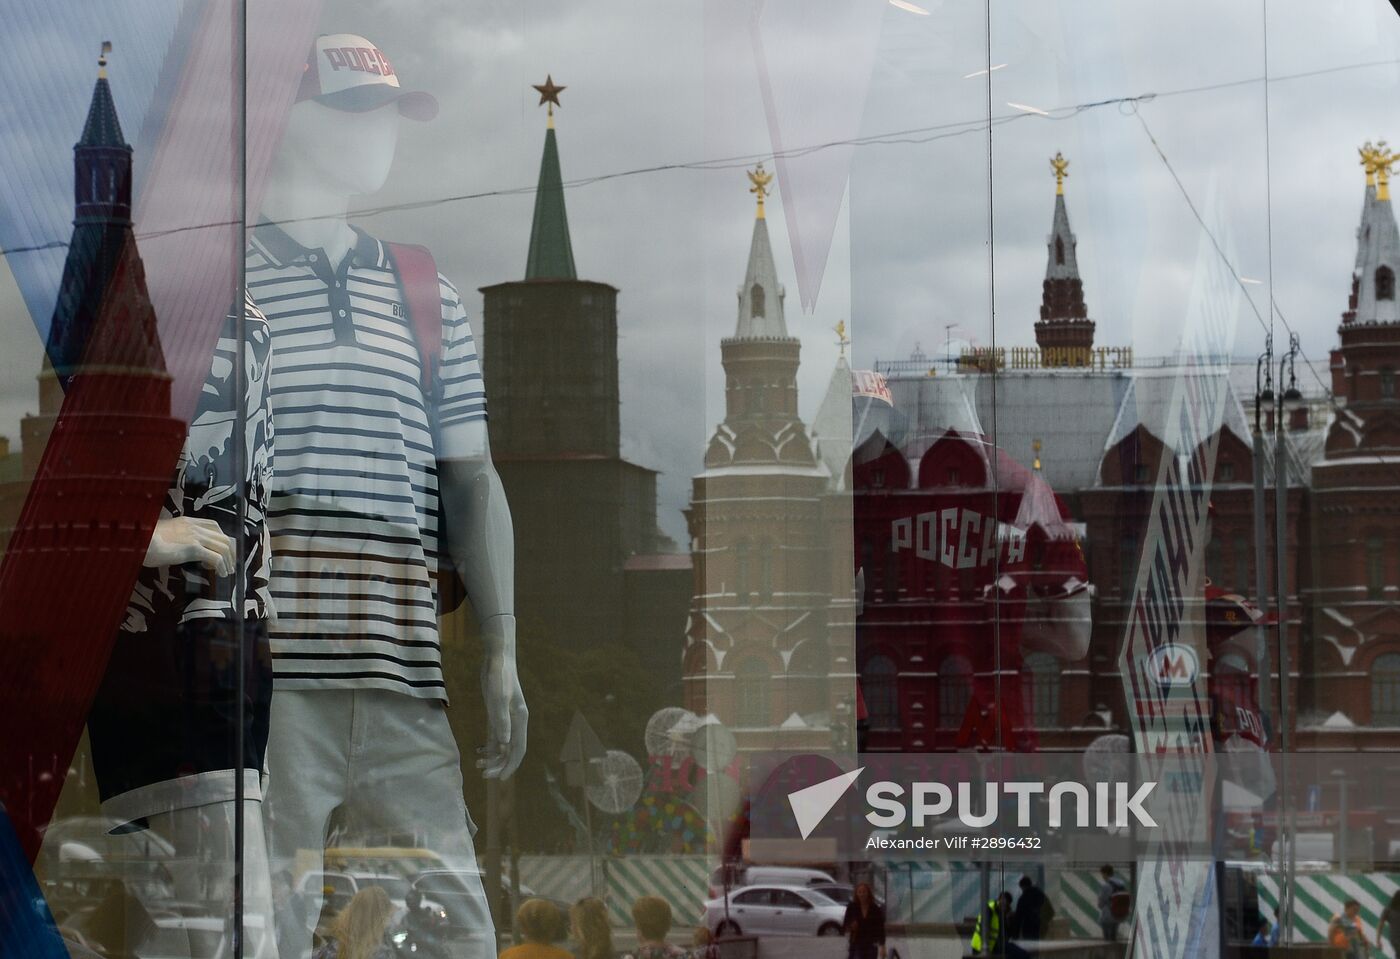 Apparel of Russian national athletics and freestyle wrestling teams prior to 2016 Olympics